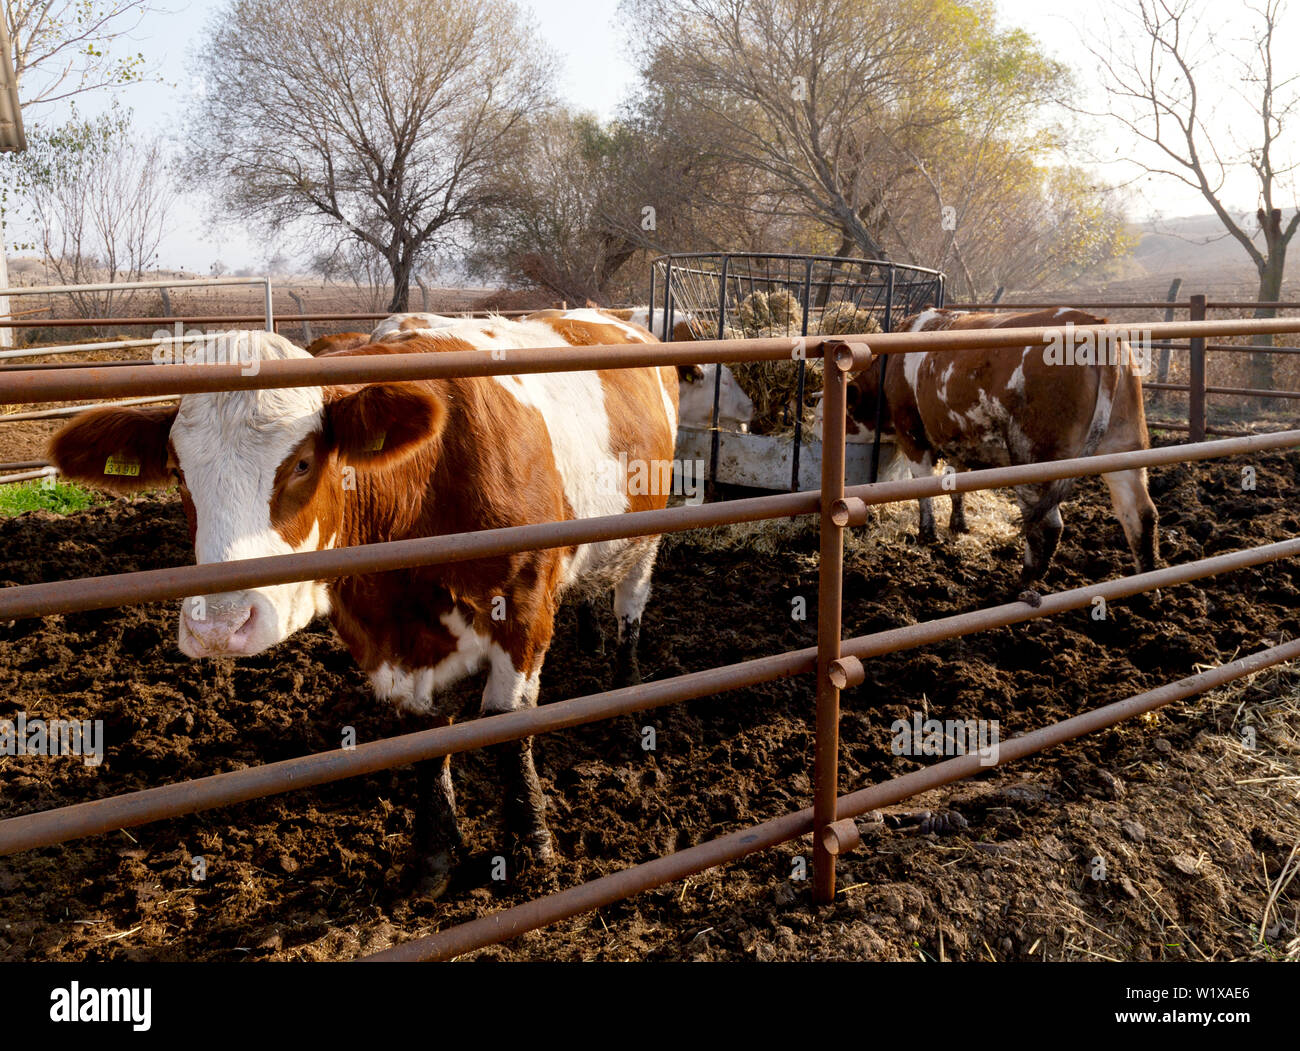 Dairy cows at countryside Stock Photo